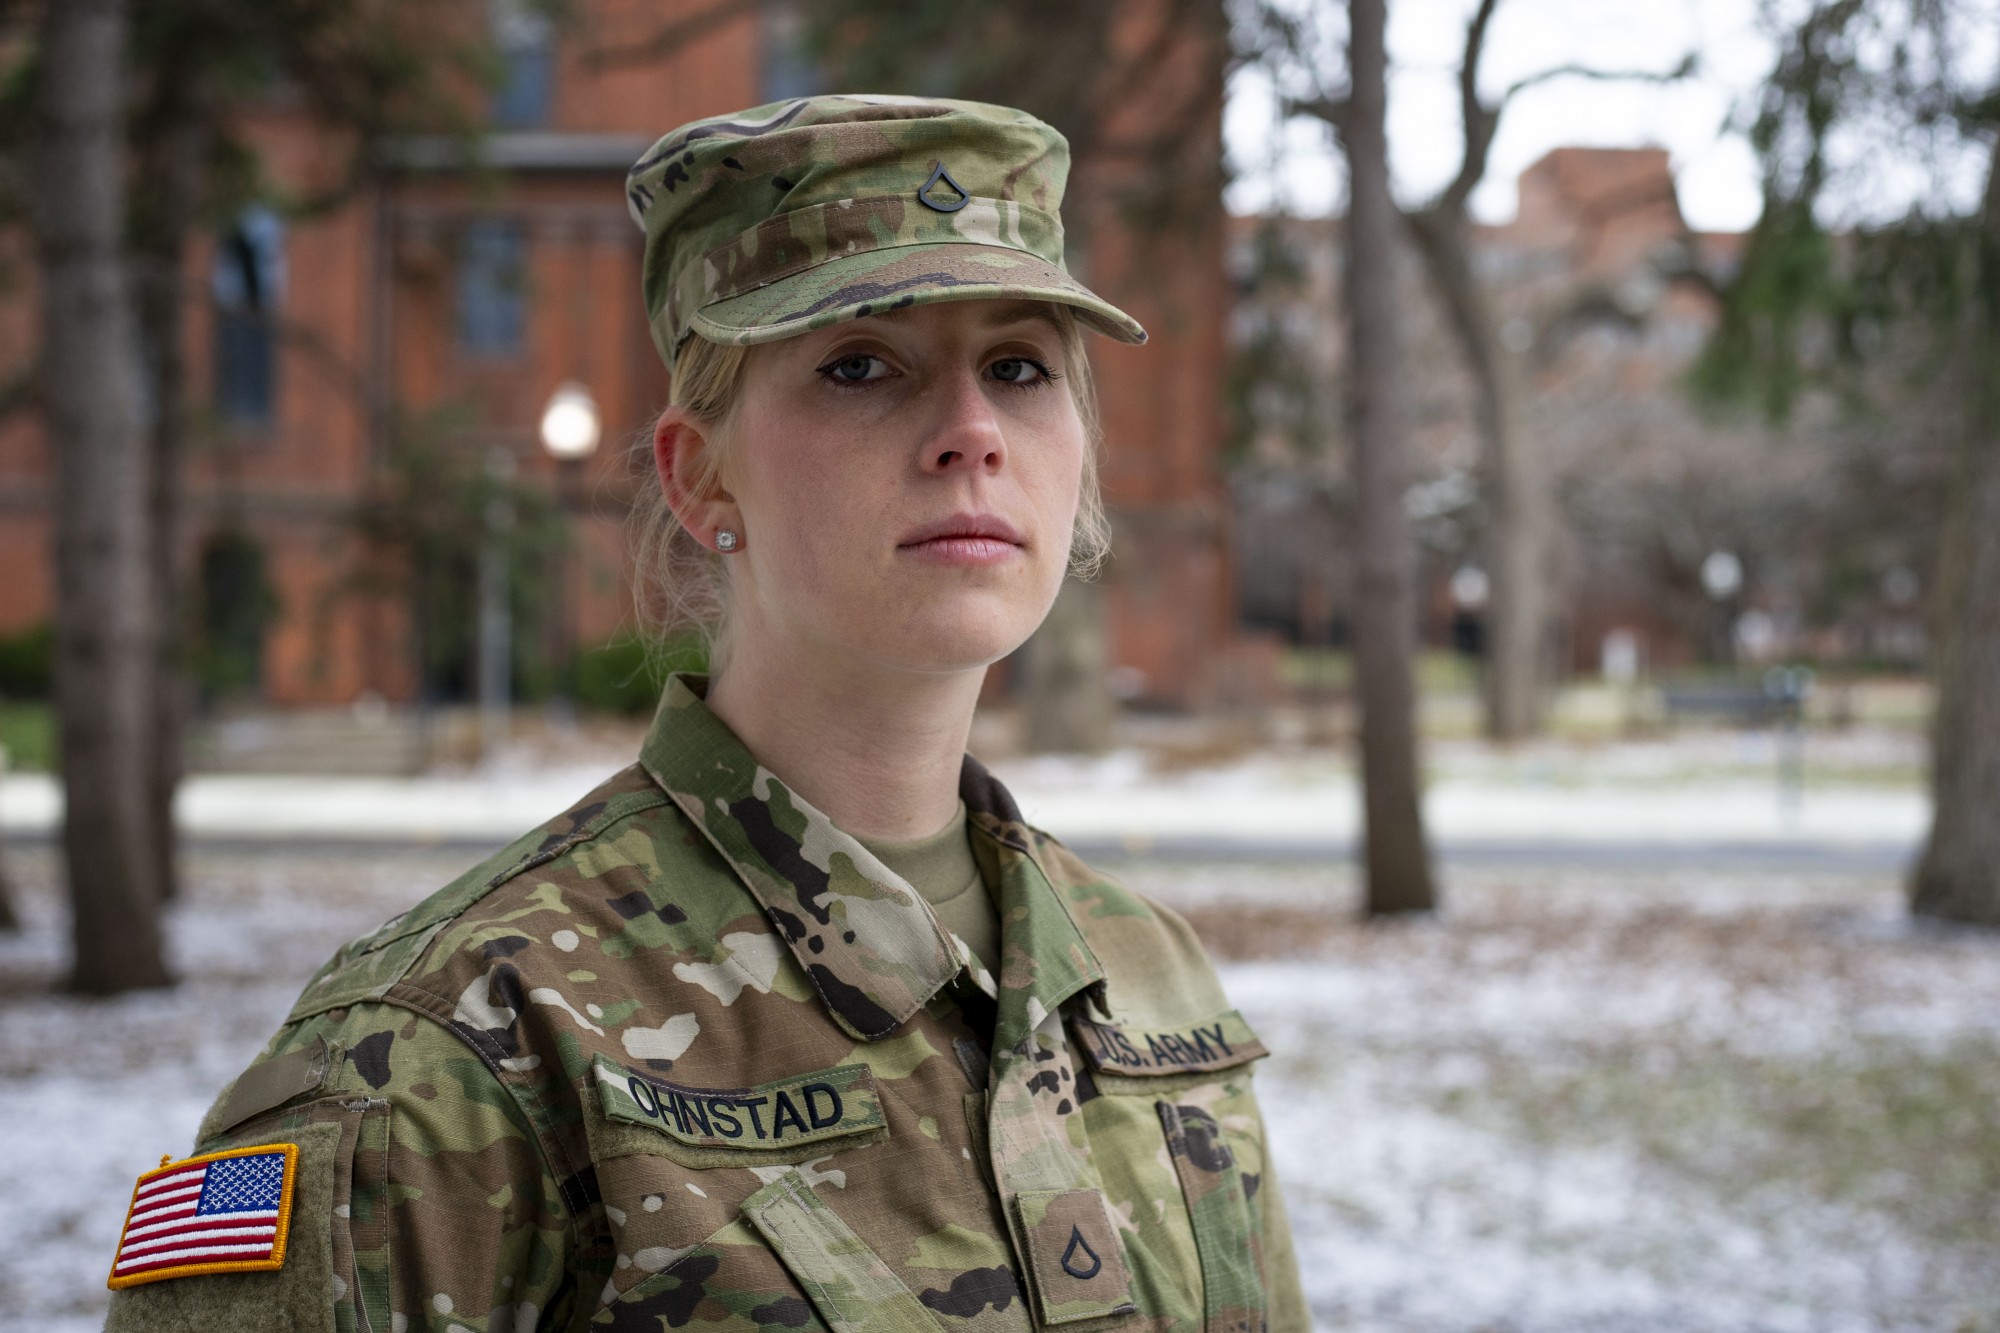 Senior Violet Ohnstad poses for a portrait on campus on Friday, April 3. Ohnstad, who enlisted in the National Guard in January, is uncertain what the next few months will look like as she prepares for basic training. 